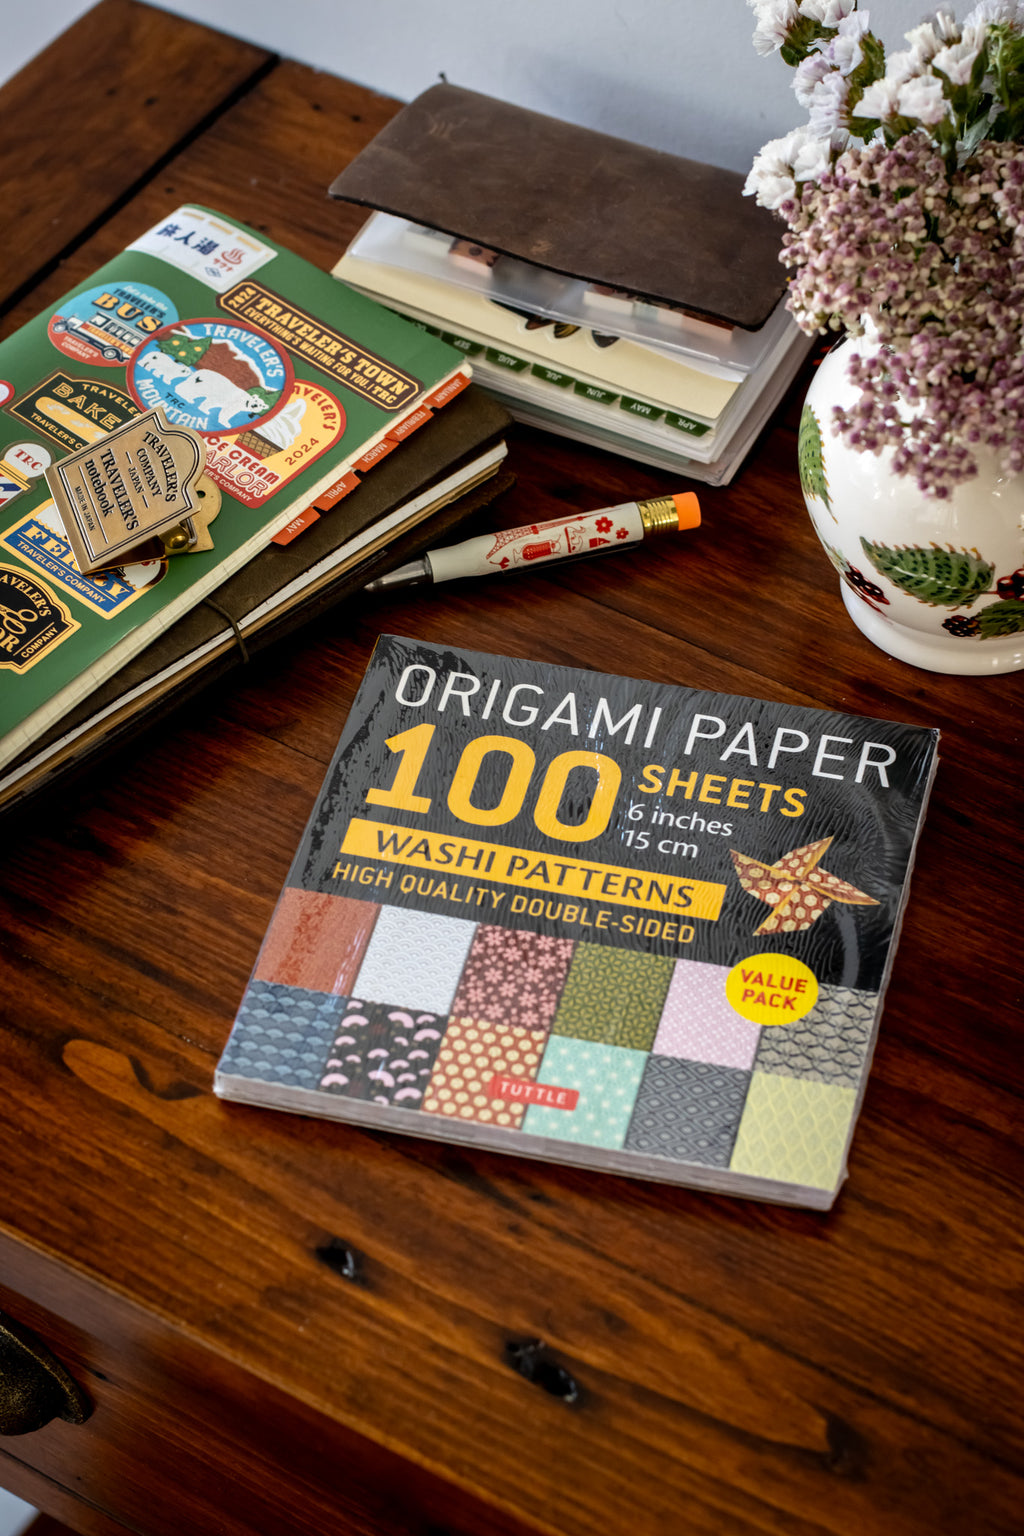 Origami Paper Washi Patterns 100 Sheets 15cm